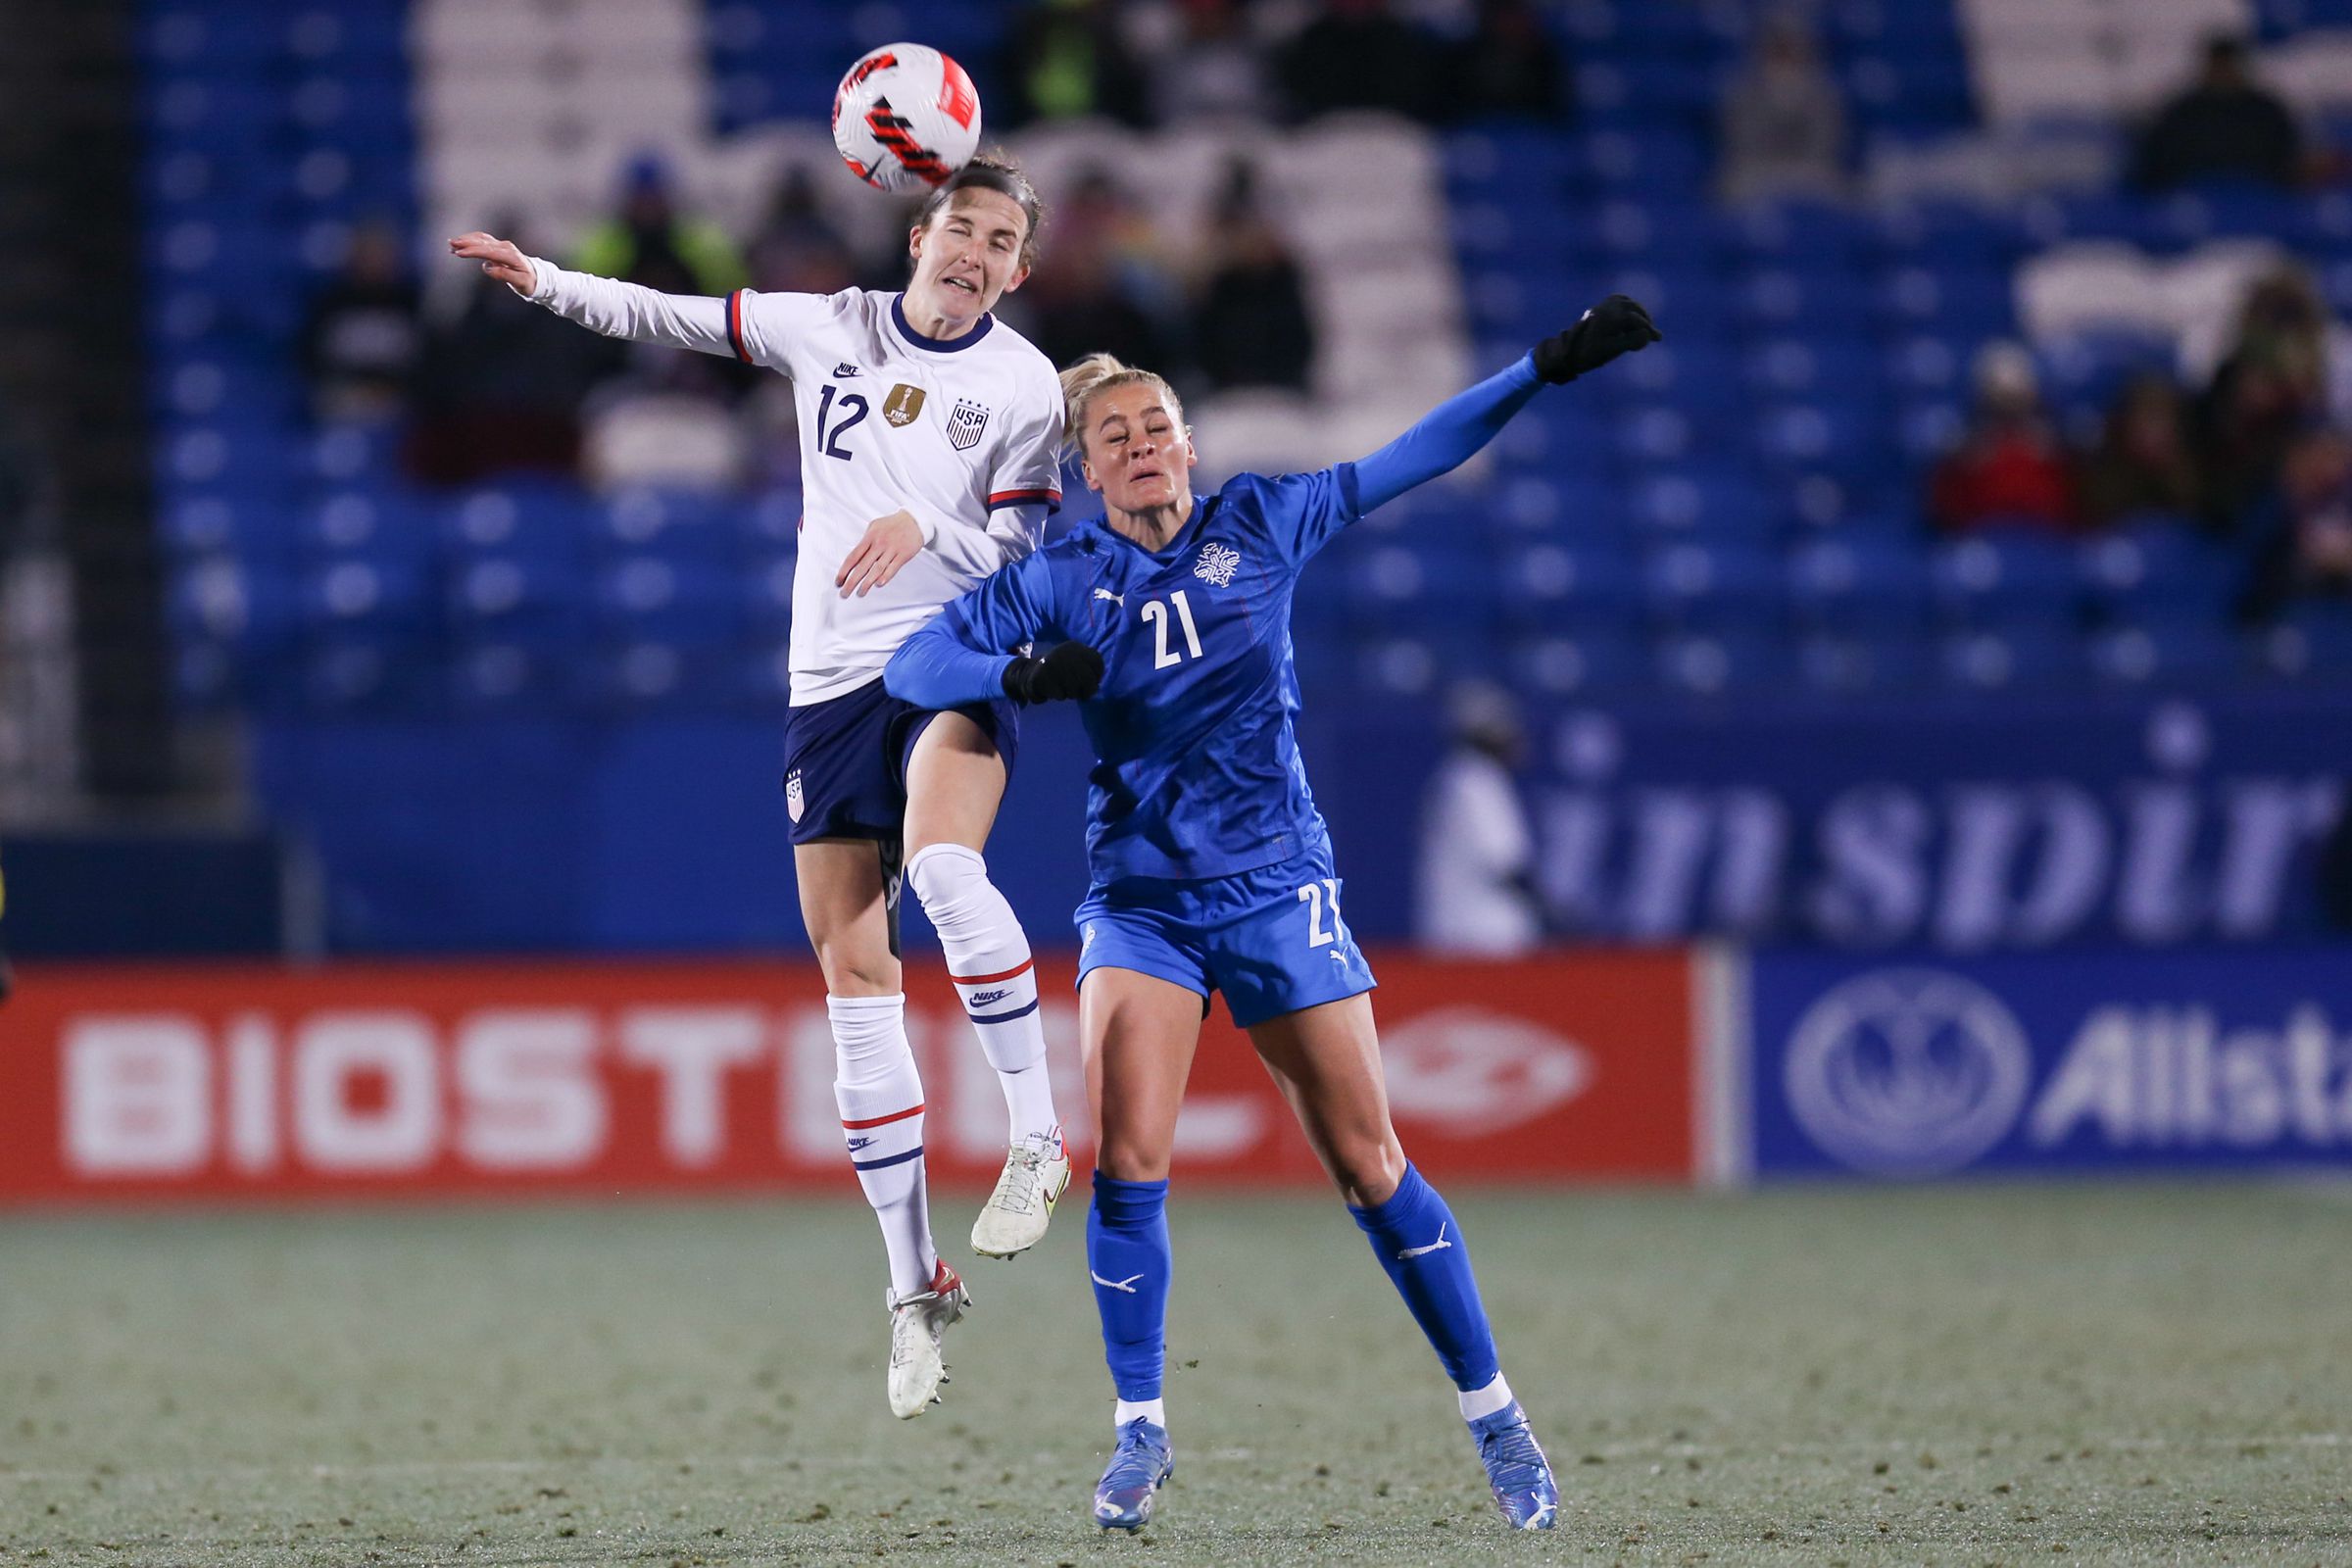 2022 SheBelieves Cup - Iceland v United States